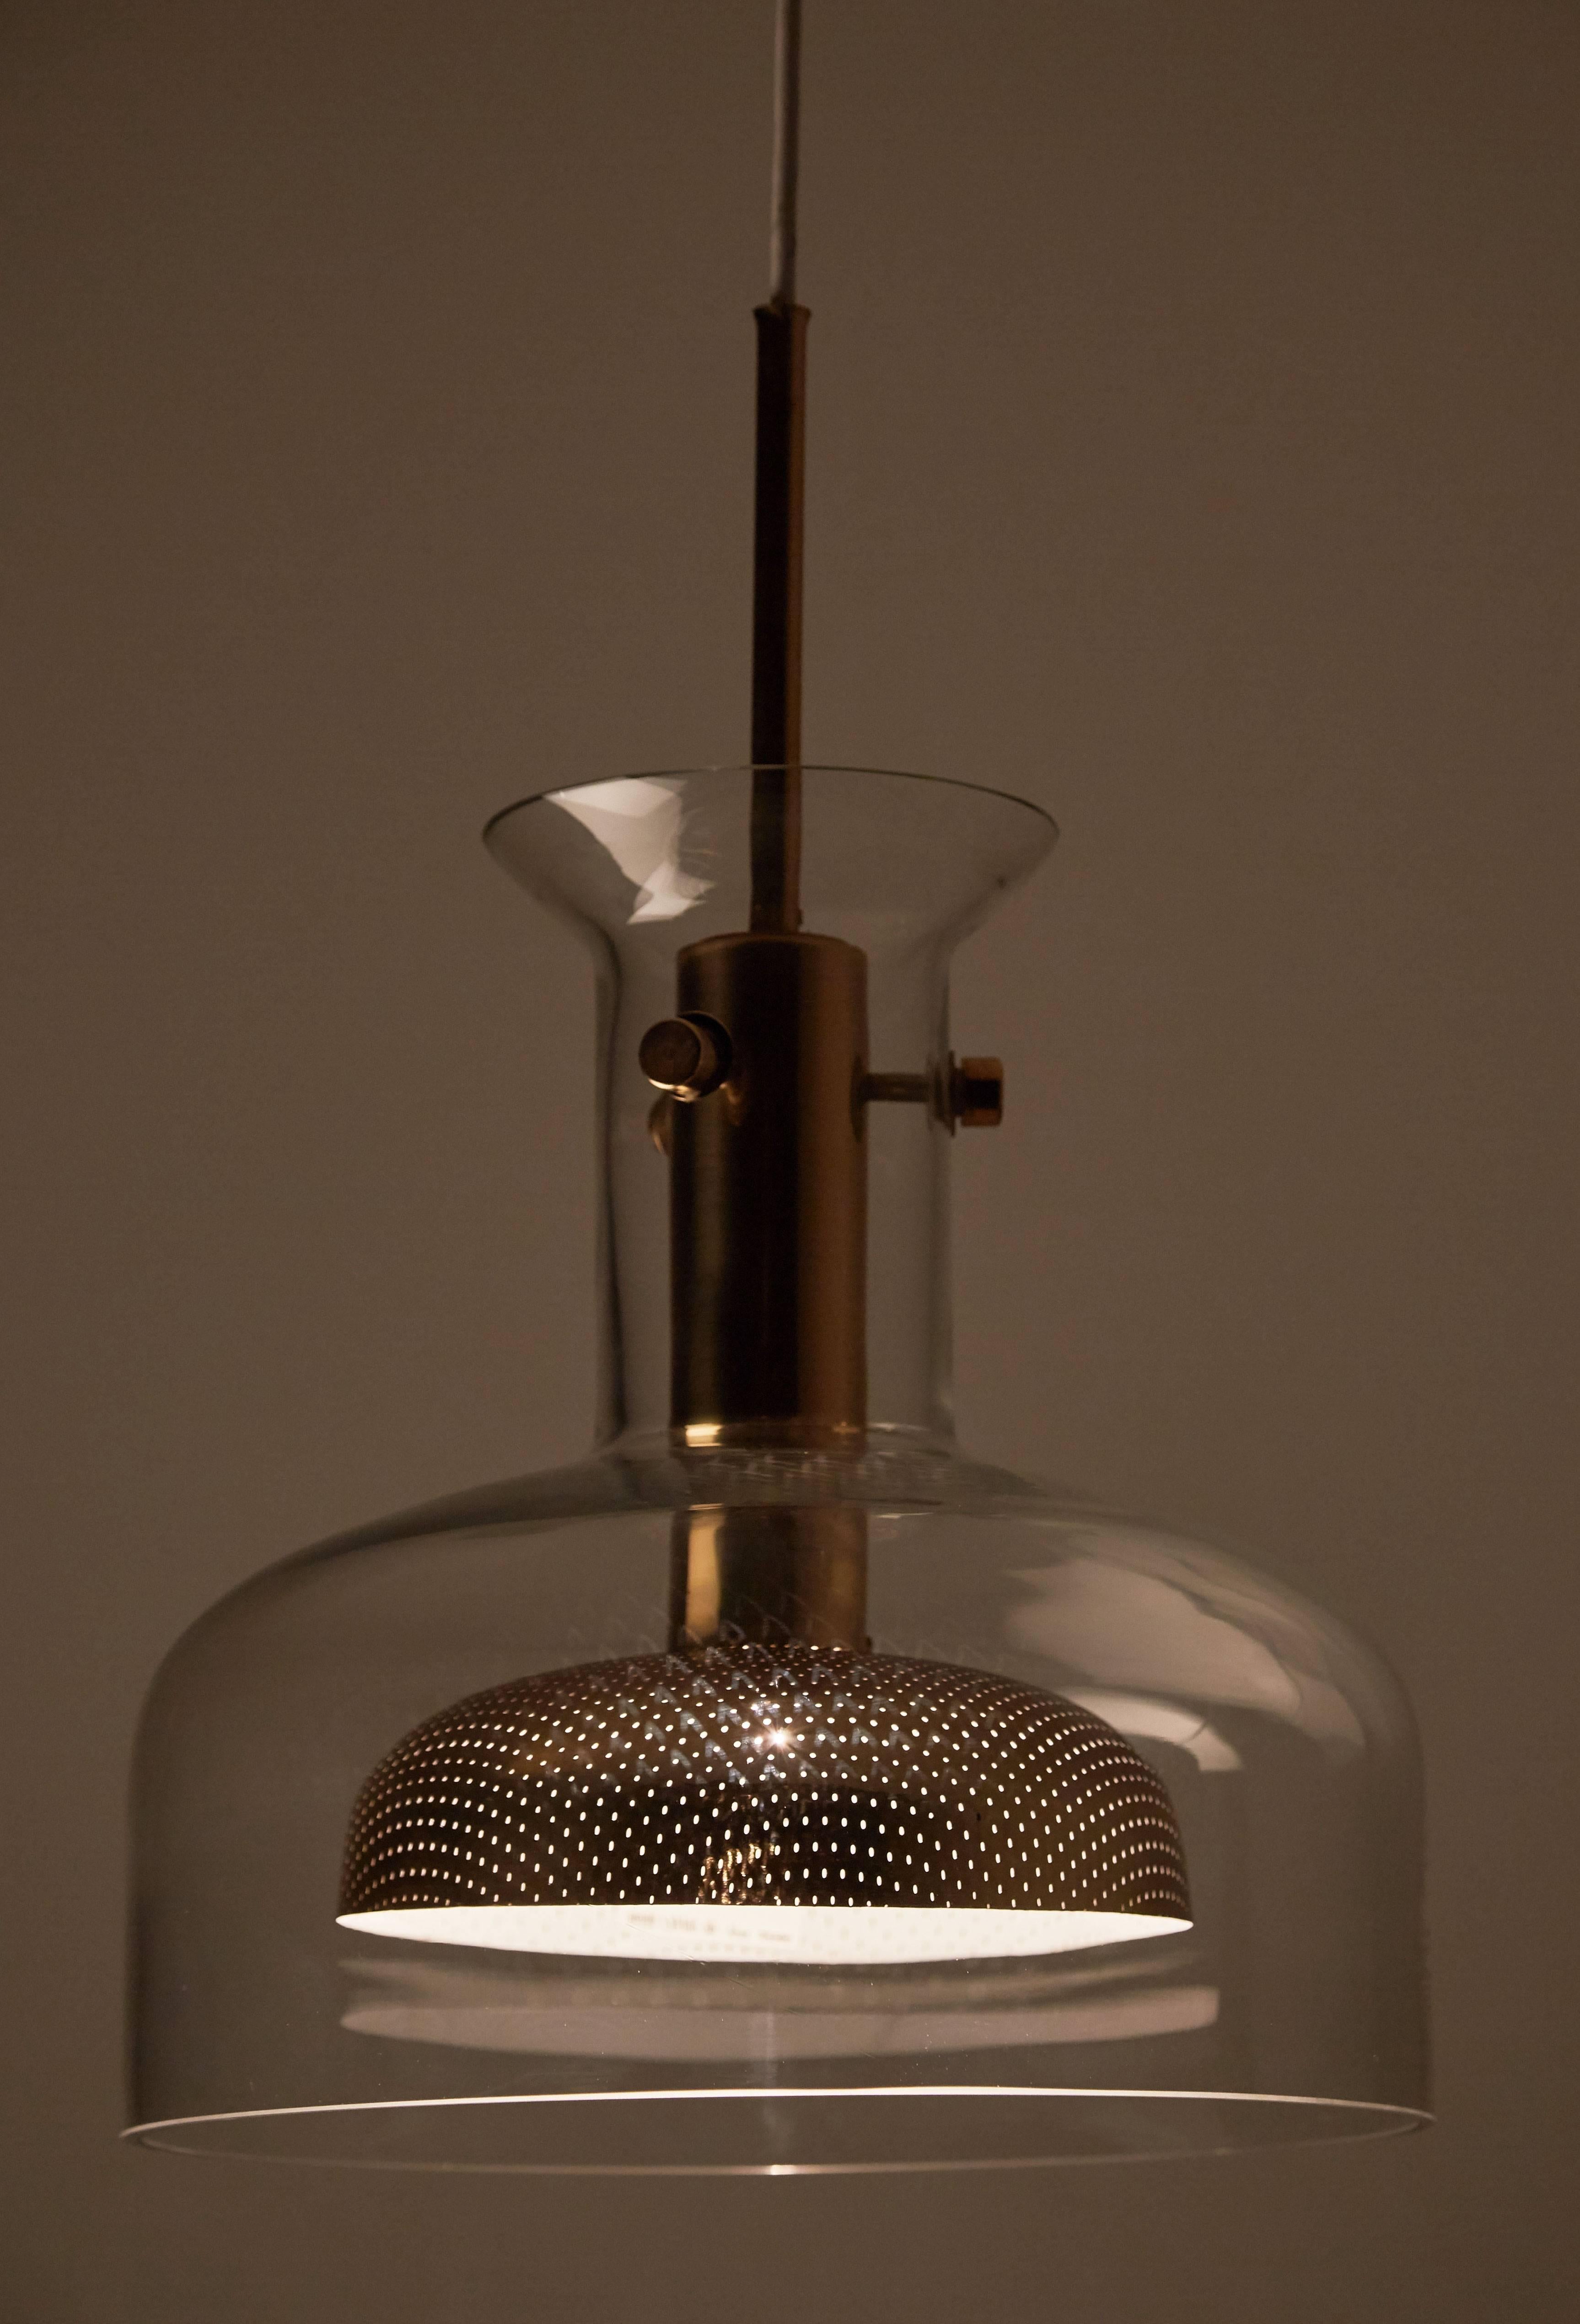 Crystal' Ceiling Light by Anders Pehrson for Atelje Lyktan. Designed in Sweden circa 1970s. Outer shade made of glass, the inner shade made of brass with small perforated holes. Retains original manufacturers label. Wired for US junction boxes.